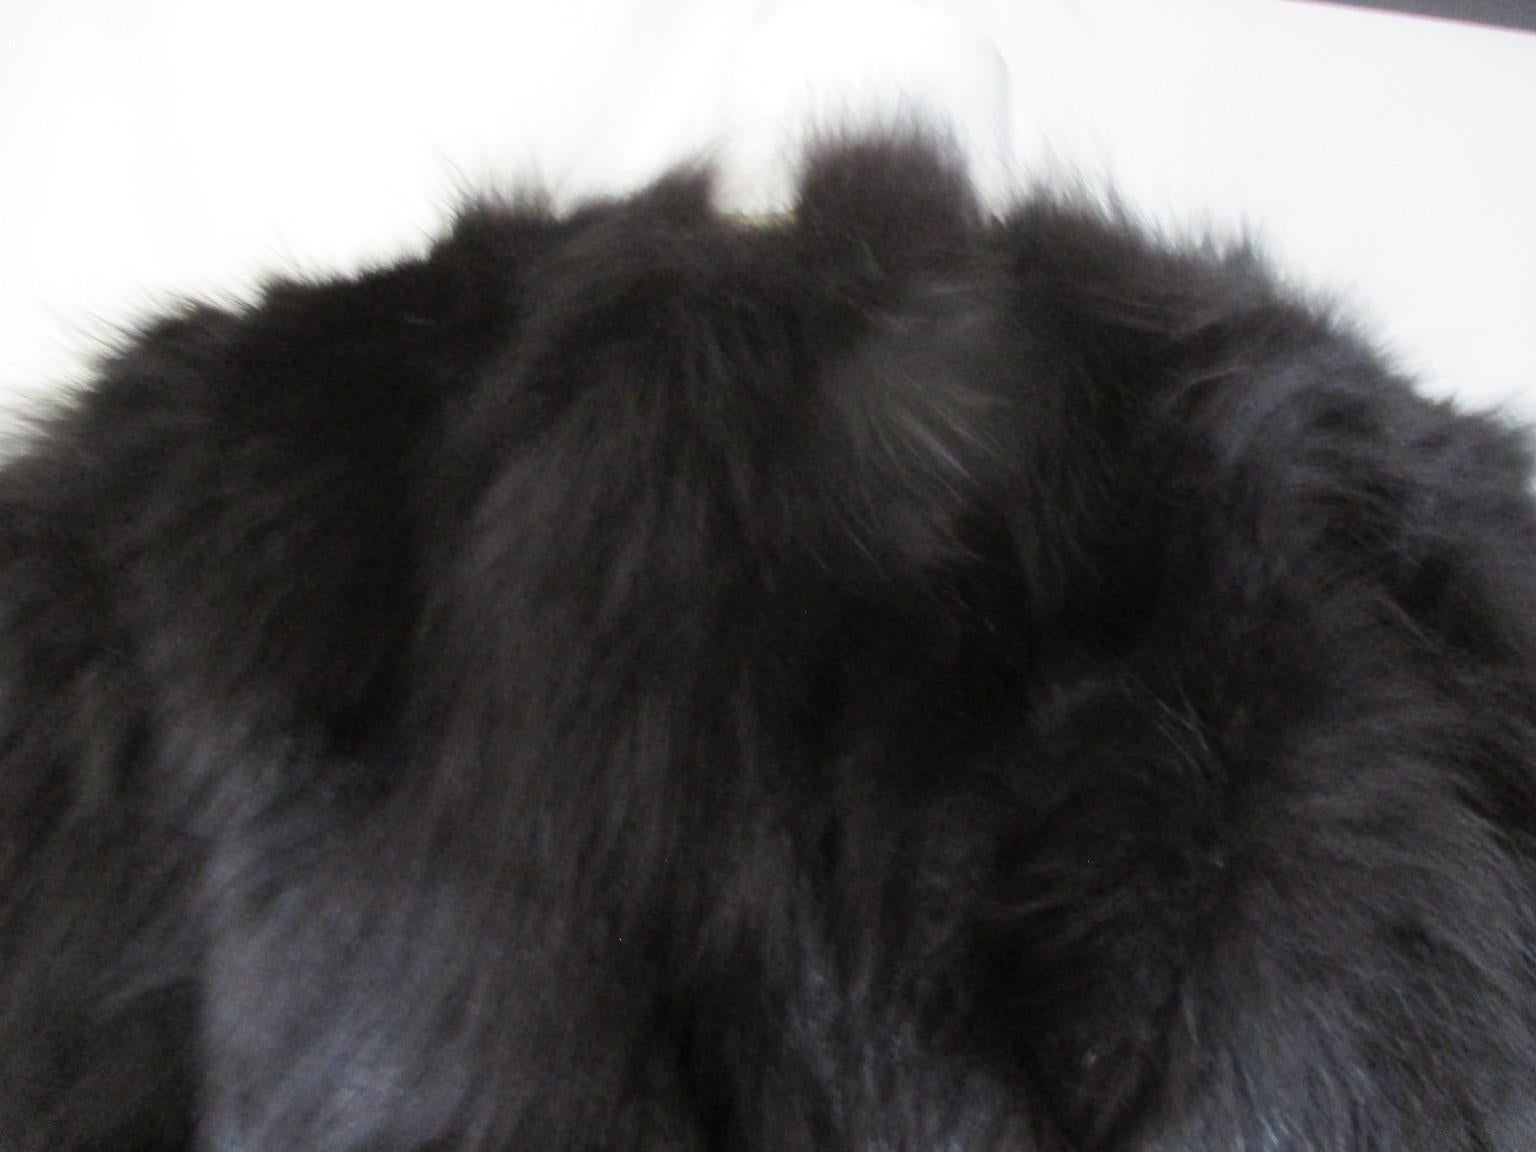 This beautiful jacket is made of very soft black fox fur and is light to wear.    

We offer more luxury fur, view our storefront.

Details:
Manufactured Toscana Pelleccerie, Italy
Black lining
2 pockets
3 closing hooks 
Appears to be about medium,